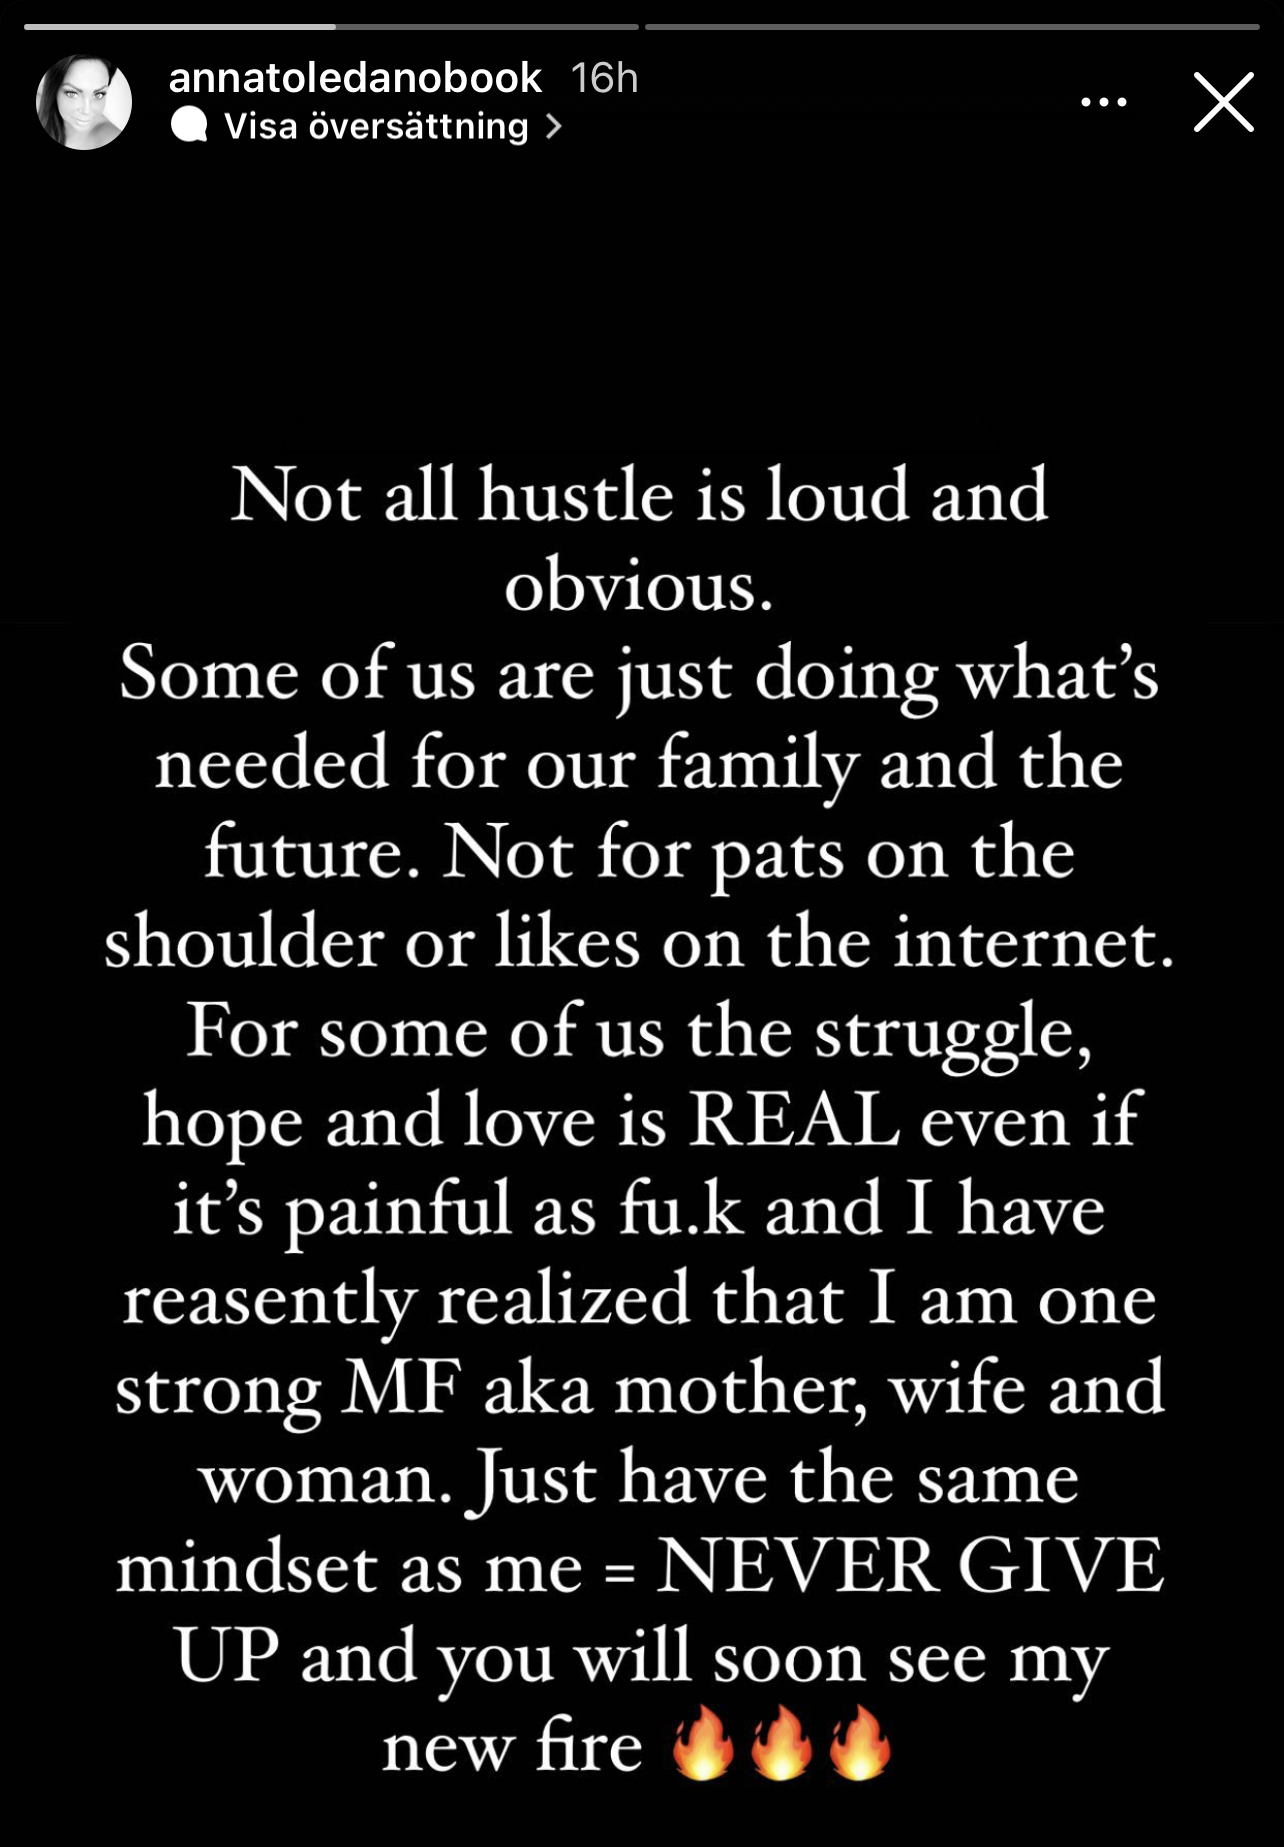 Not all hustle is loud and obvious. Some if us are just doing what’s needed for our family and the future. Not for a pat on the shoulder or likes on the internet. For some of us the struggle, hope and love even if it is painful as fuck and I have finally realized that I am one strong MF as a mother, wife, woman. Just have the same mindset as me = never give up and you will soon se my new fire. 